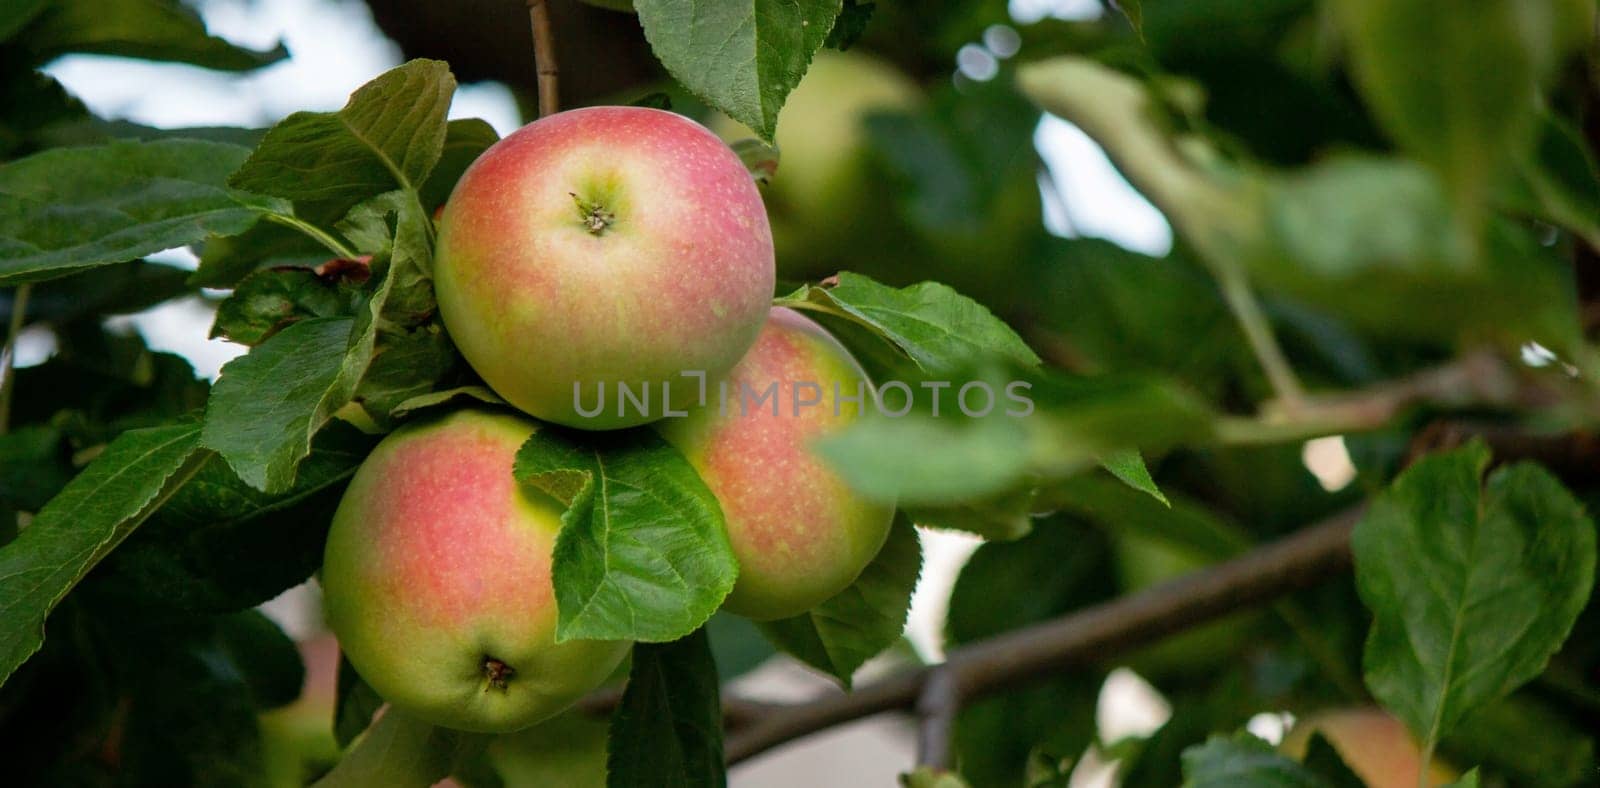 harvest of apples on the tree. Selective focus. Nature